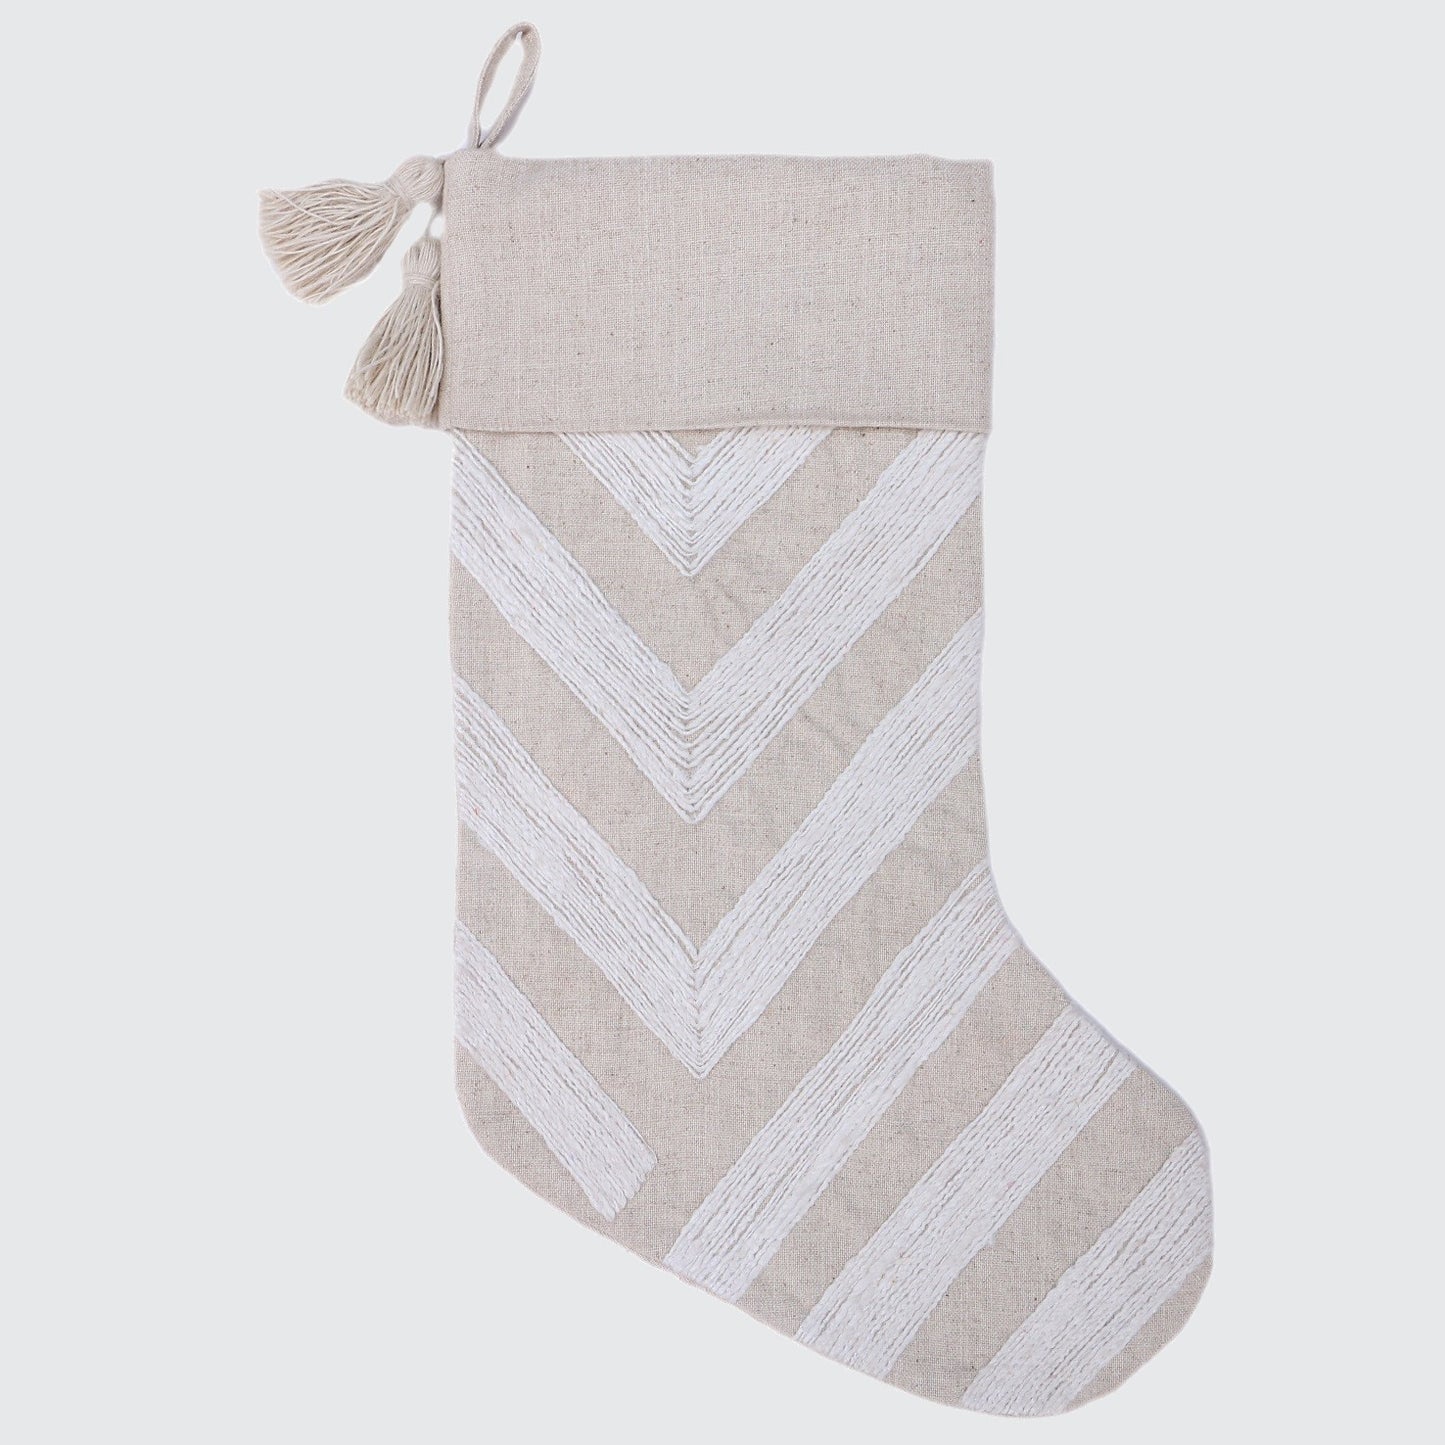 Beige and White Hand Woven Christmas Stocking